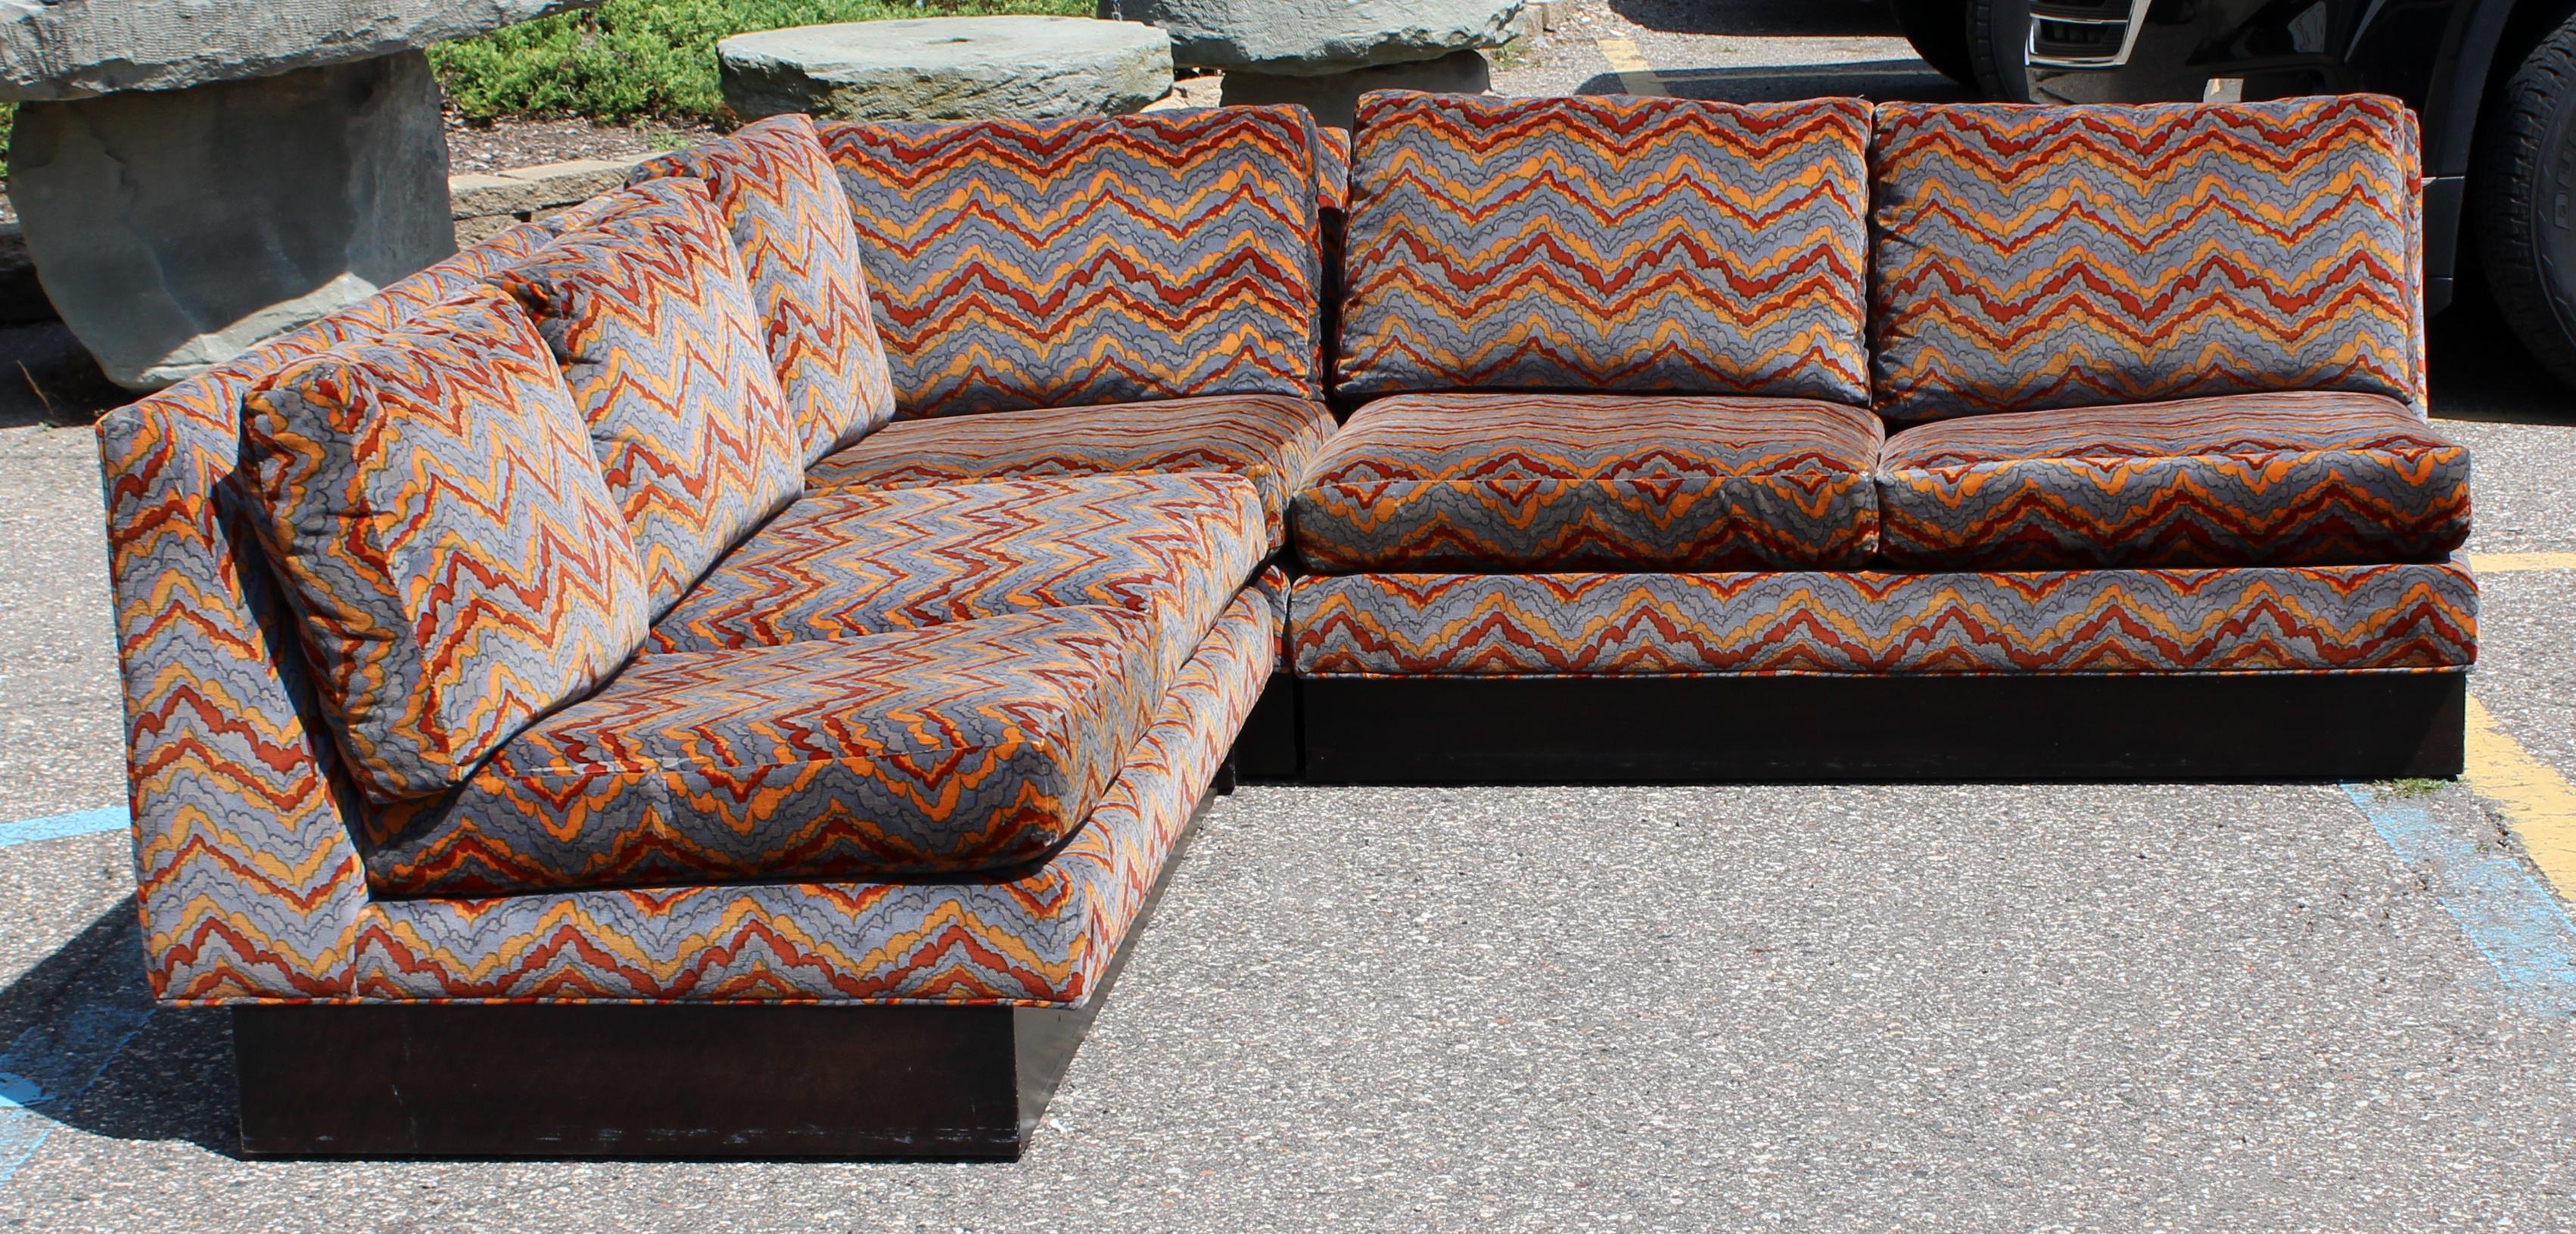 For your consideration is a gorgeous, three-piece sectional plinth base sofa by Erwin Lambeth, circa 1970s. Done in Jack Lenor Larsen fabric. In excellent condition. The dimensions of each piece are 52/33